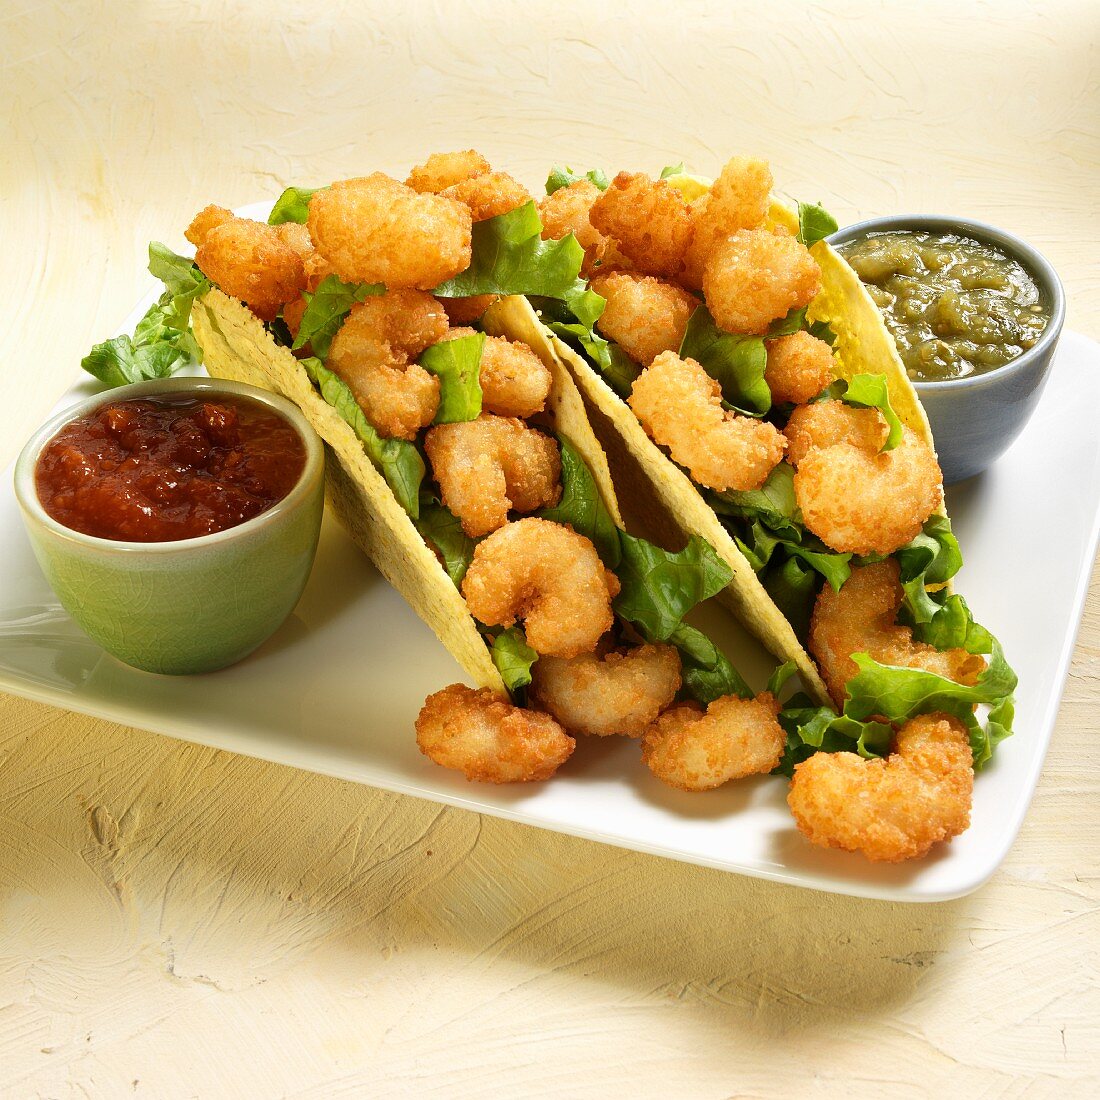 Tacos with battered prawns, tomatillo sauce and chili sauce